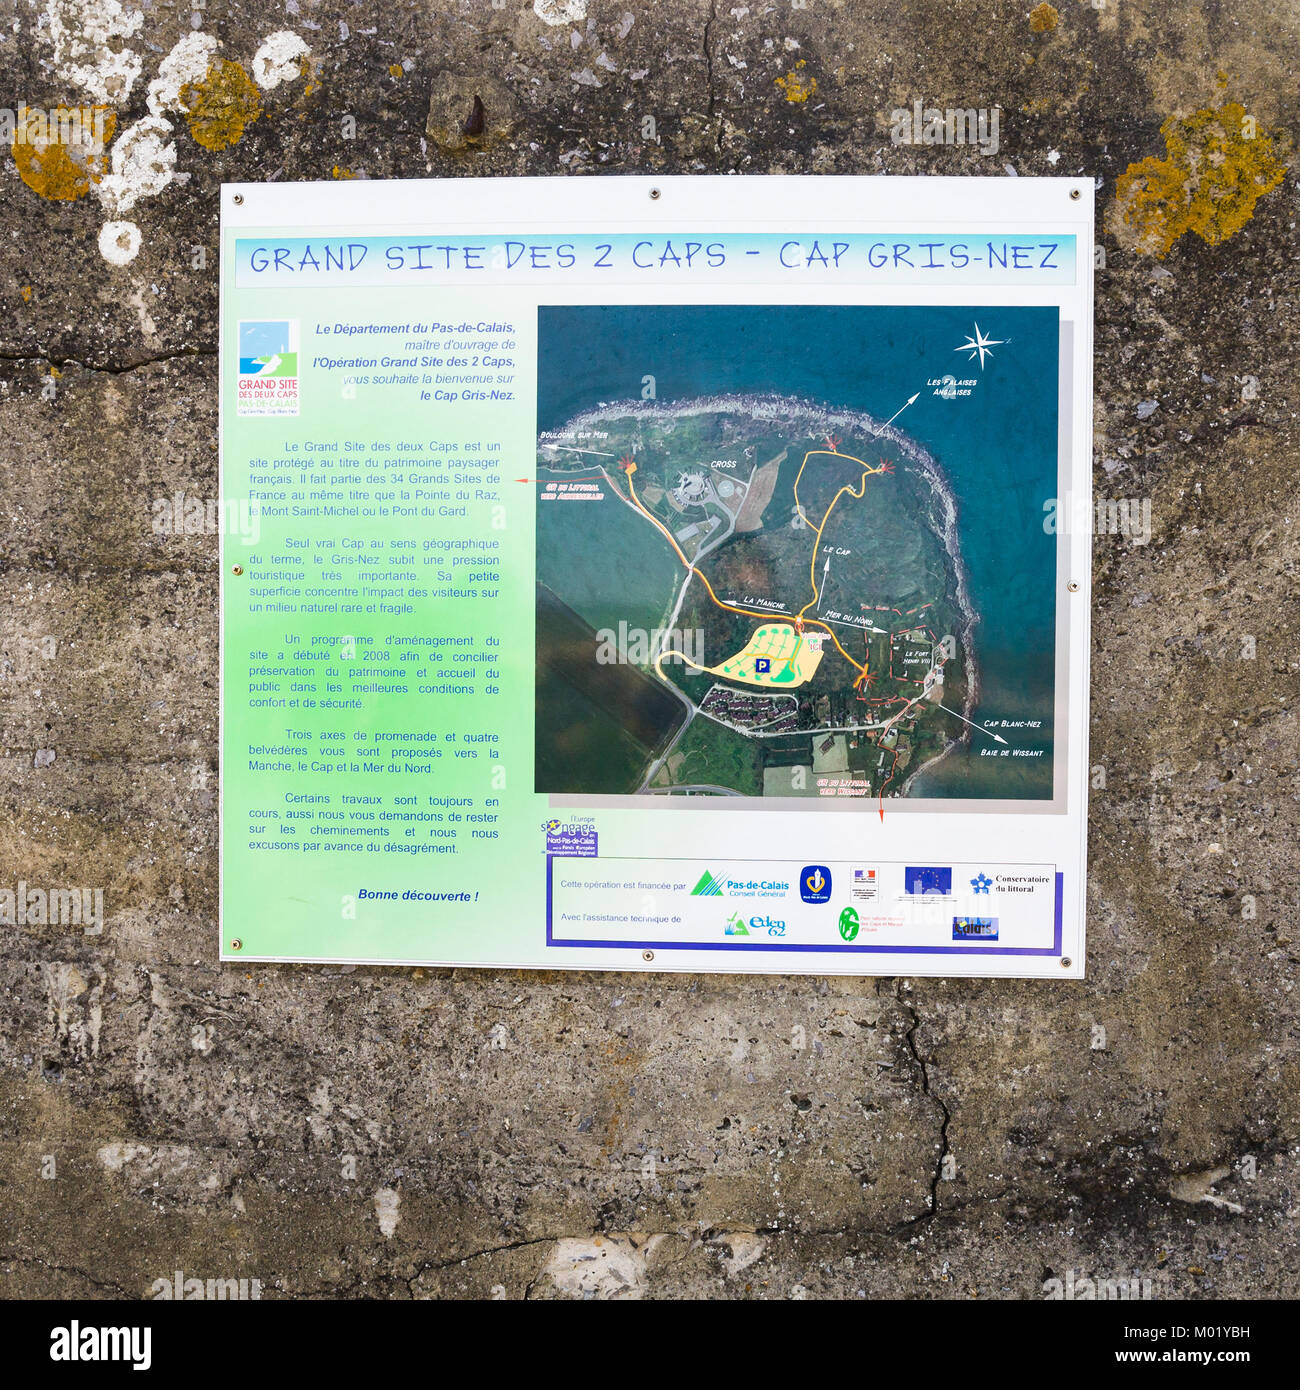 AUDINGHEN, FRANCE - JUNE 30, 2010: map of cape on the old bunker wall at the cape Cap Gris-Nez in Cote d'Opale region. The cliffs of Cap Gris-Nez are  Stock Photo